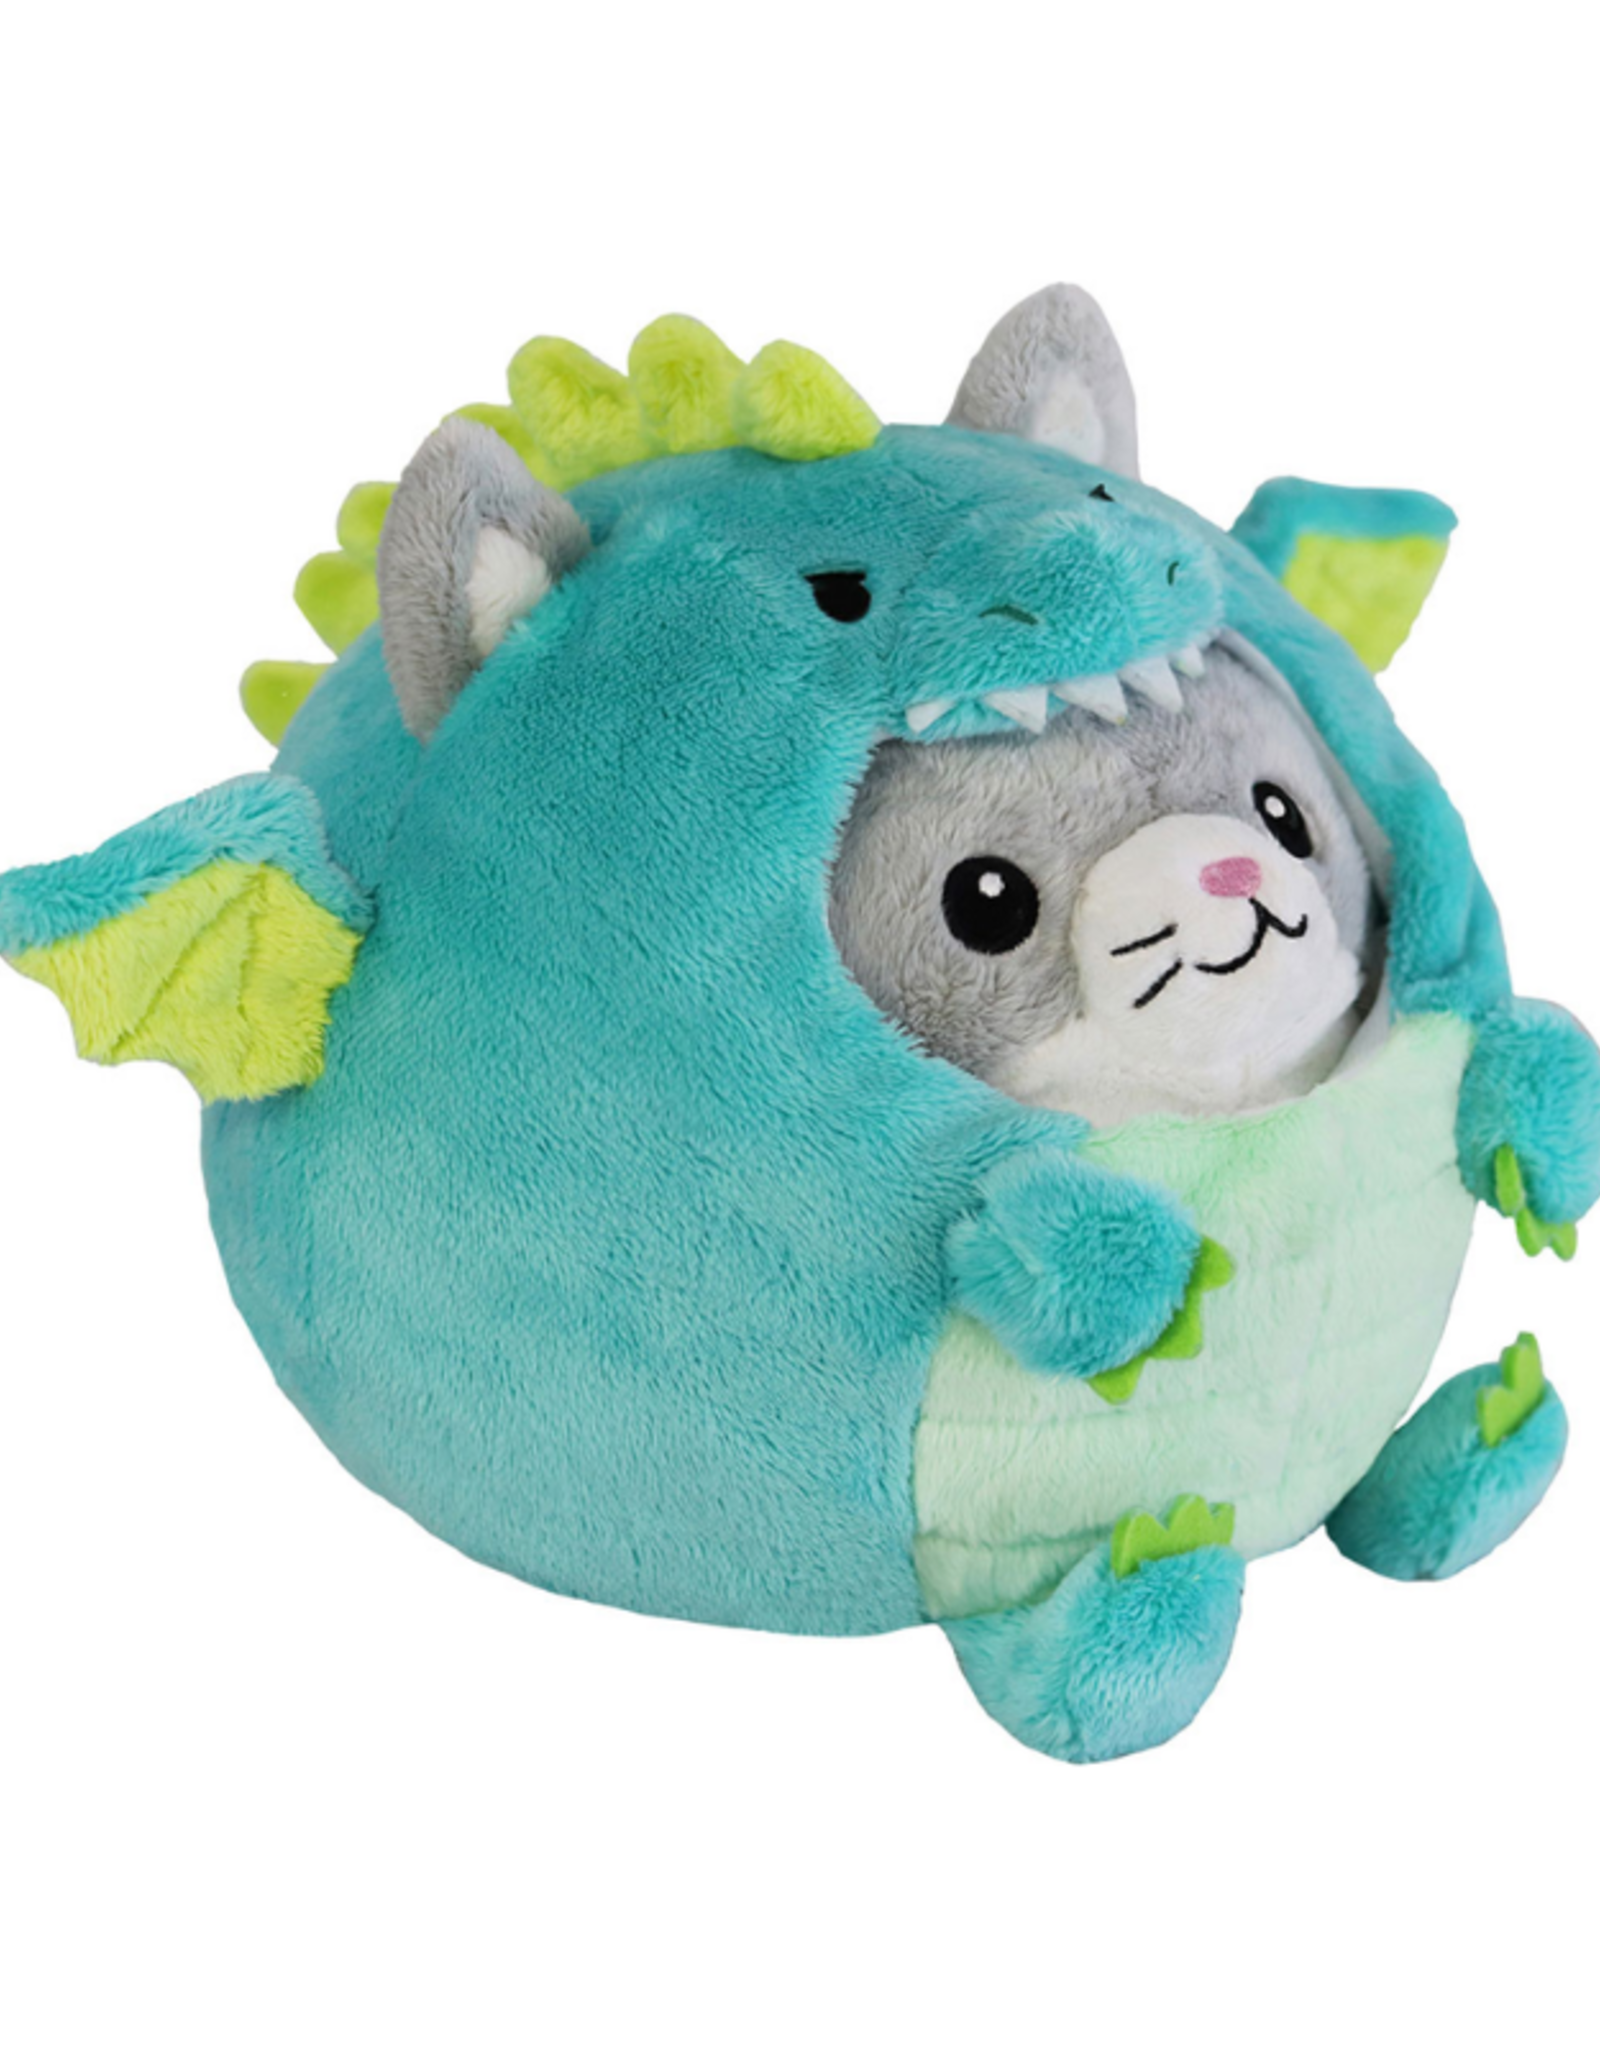 Squishable Squishable: Undercover Kitty in Dragon